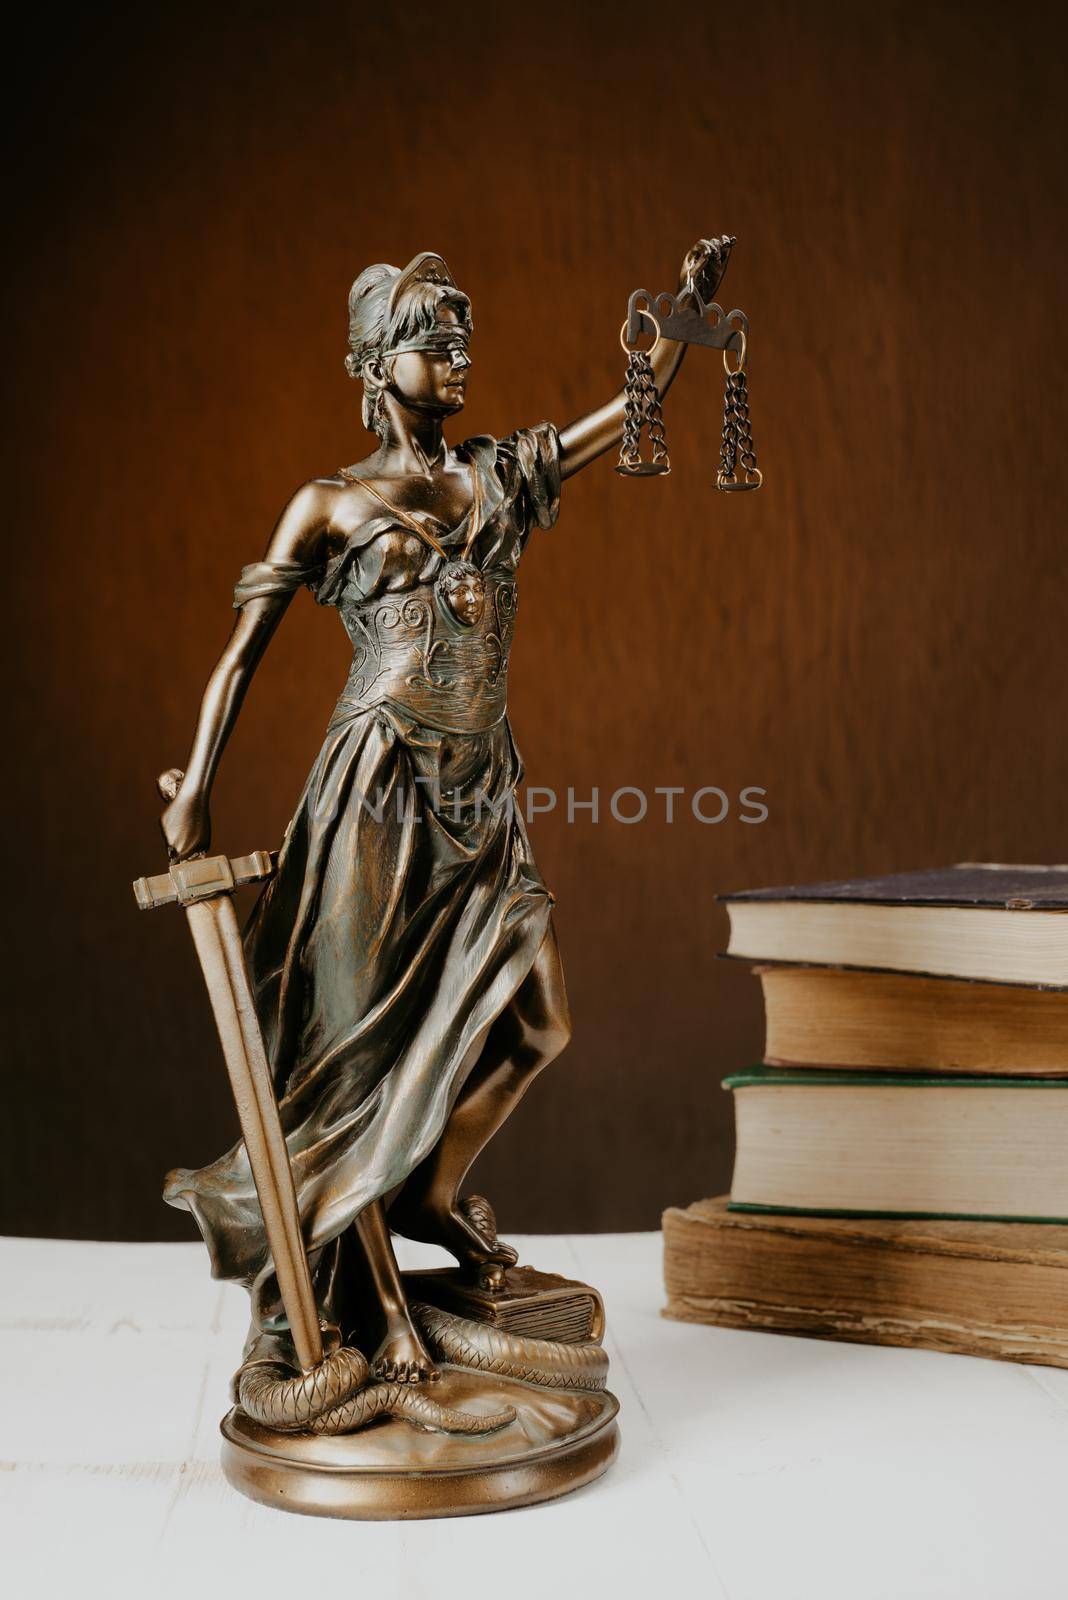 Themis figurine stands on a white wooden table next to a stack of old books. Scales Law Lawyer Business Concept. - Image